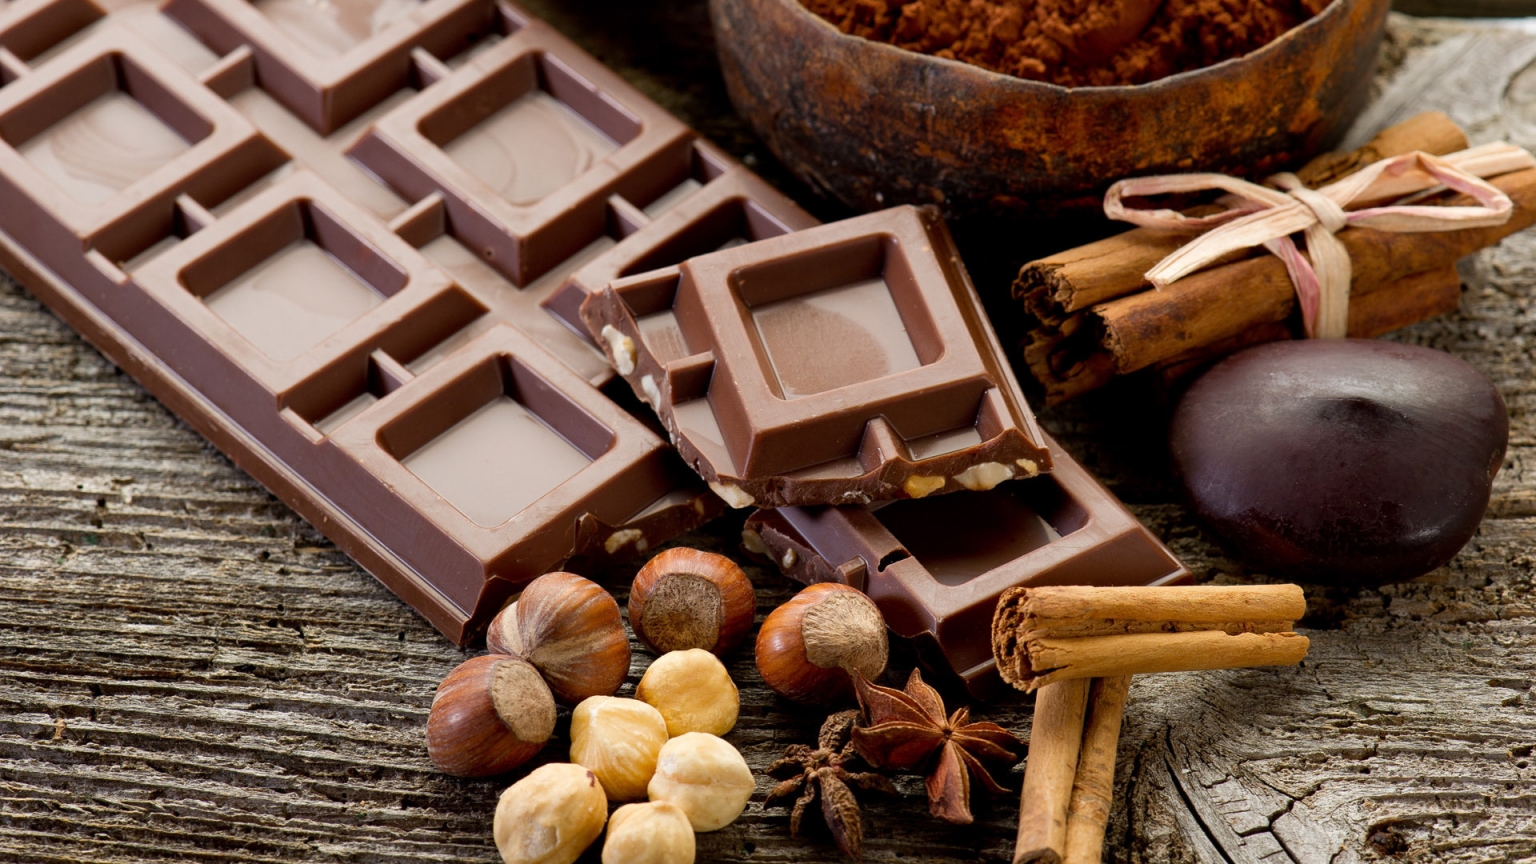 Chocolate and Cinnamon and Nuts for 1536 x 864 HDTV resolution